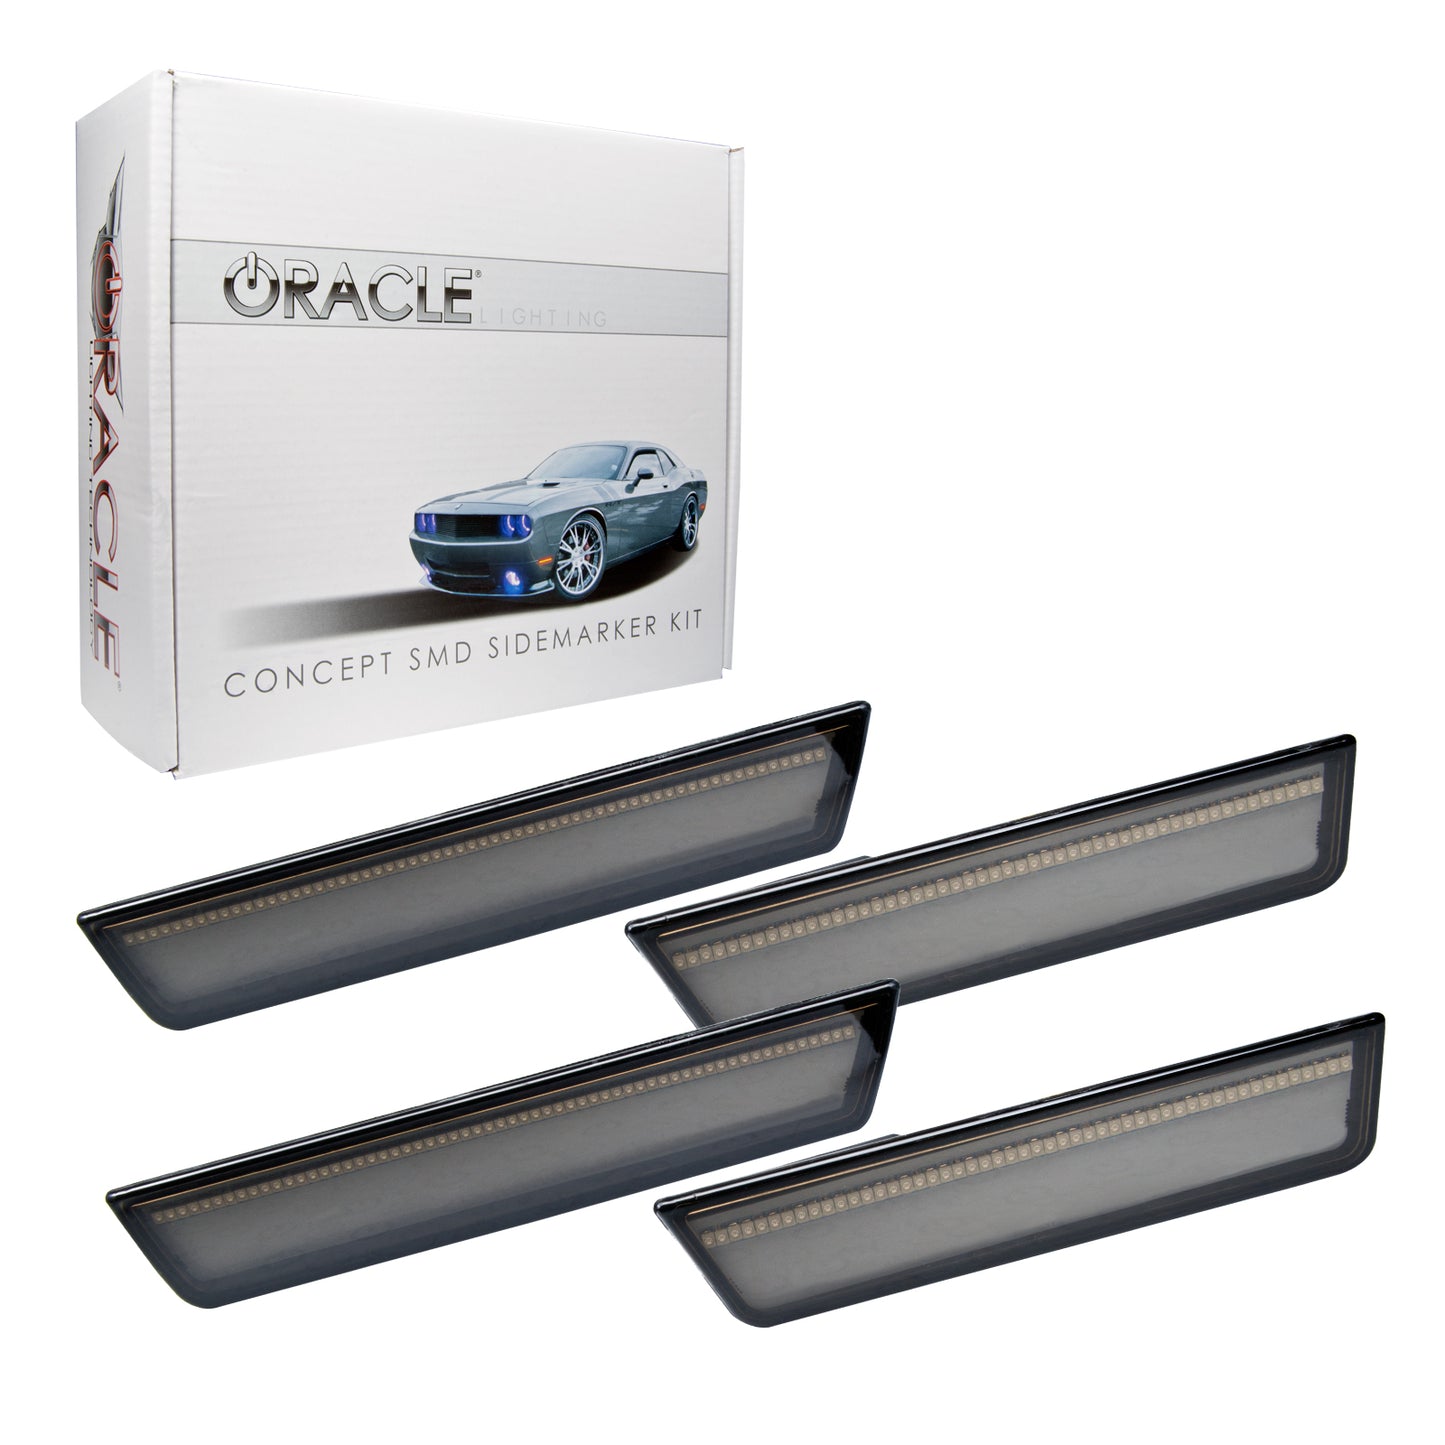 Oracle Lighting 9800-020 - 2008-2014 Dodge Challenger Concept Sidemarker Set - Tinted - No Paint